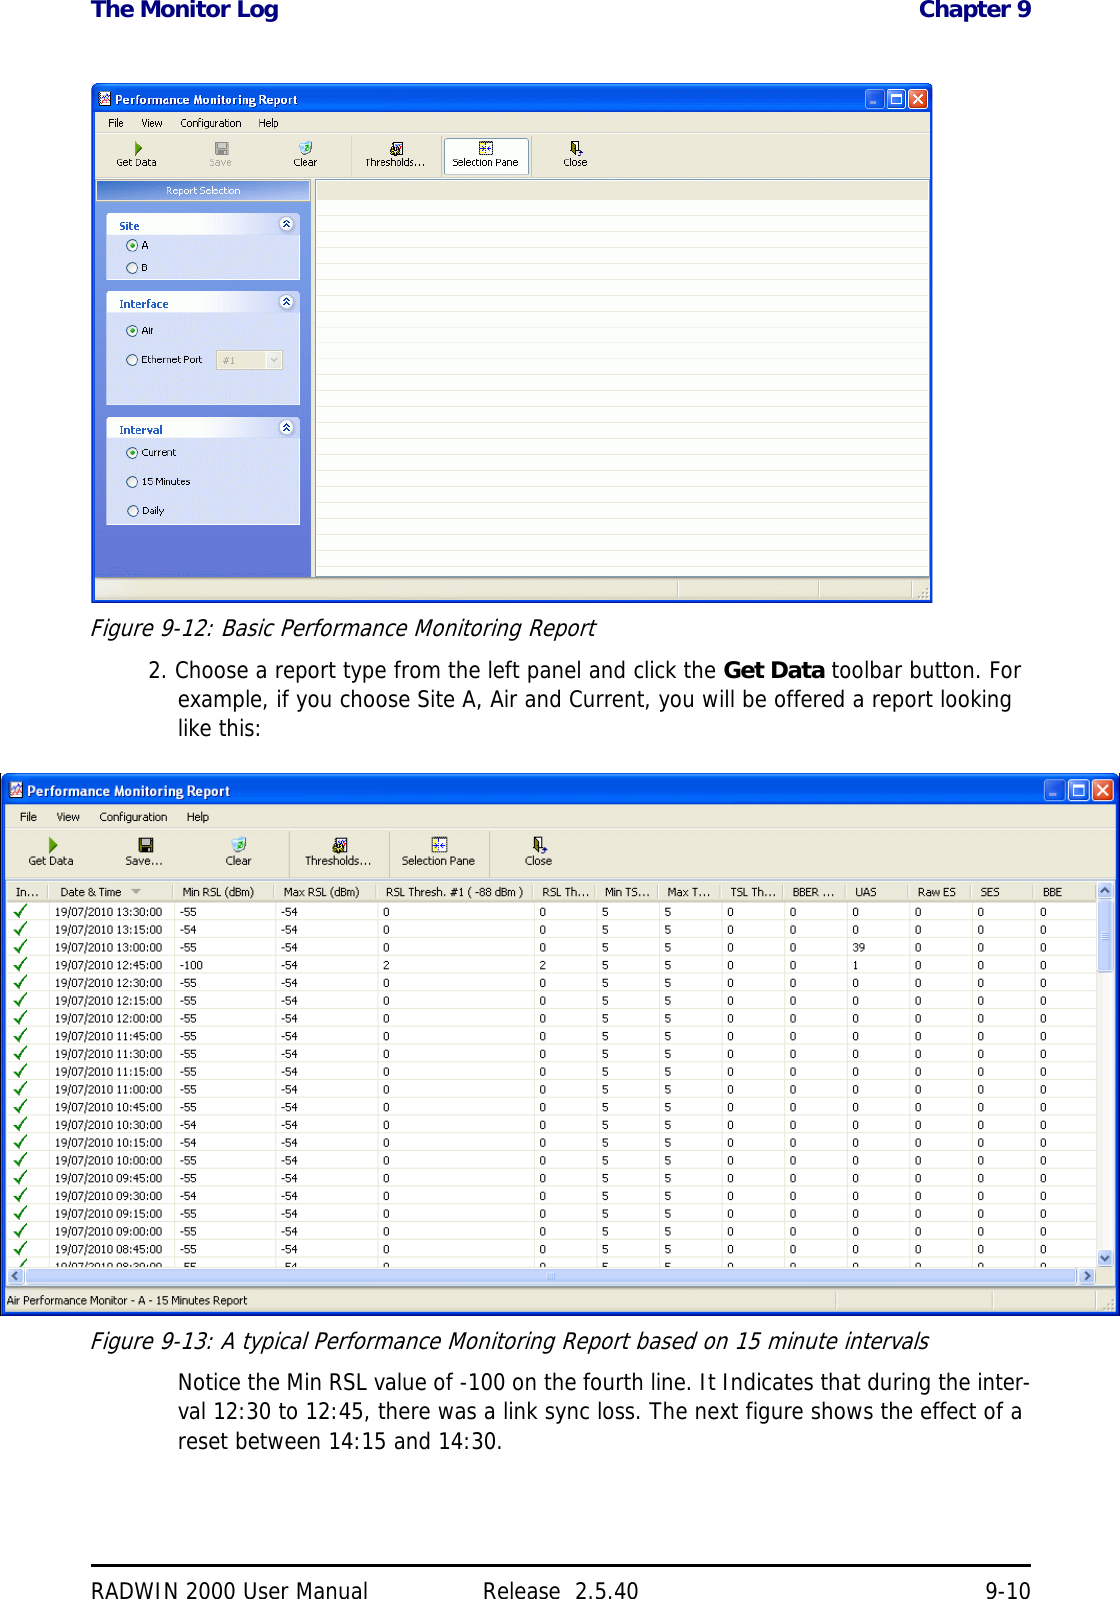 The Monitor Log Chapter 9RADWIN 2000 User Manual Release  2.5.40 9-10Figure 9-12: Basic Performance Monitoring Report2. Choose a report type from the left panel and click the Get Data toolbar button. For example, if you choose Site A, Air and Current, you will be offered a report looking like this:Figure 9-13: A typical Performance Monitoring Report based on 15 minute intervalsNotice the Min RSL value of -100 on the fourth line. It Indicates that during the inter-val 12:30 to 12:45, there was a link sync loss. The next figure shows the effect of a reset between 14:15 and 14:30.